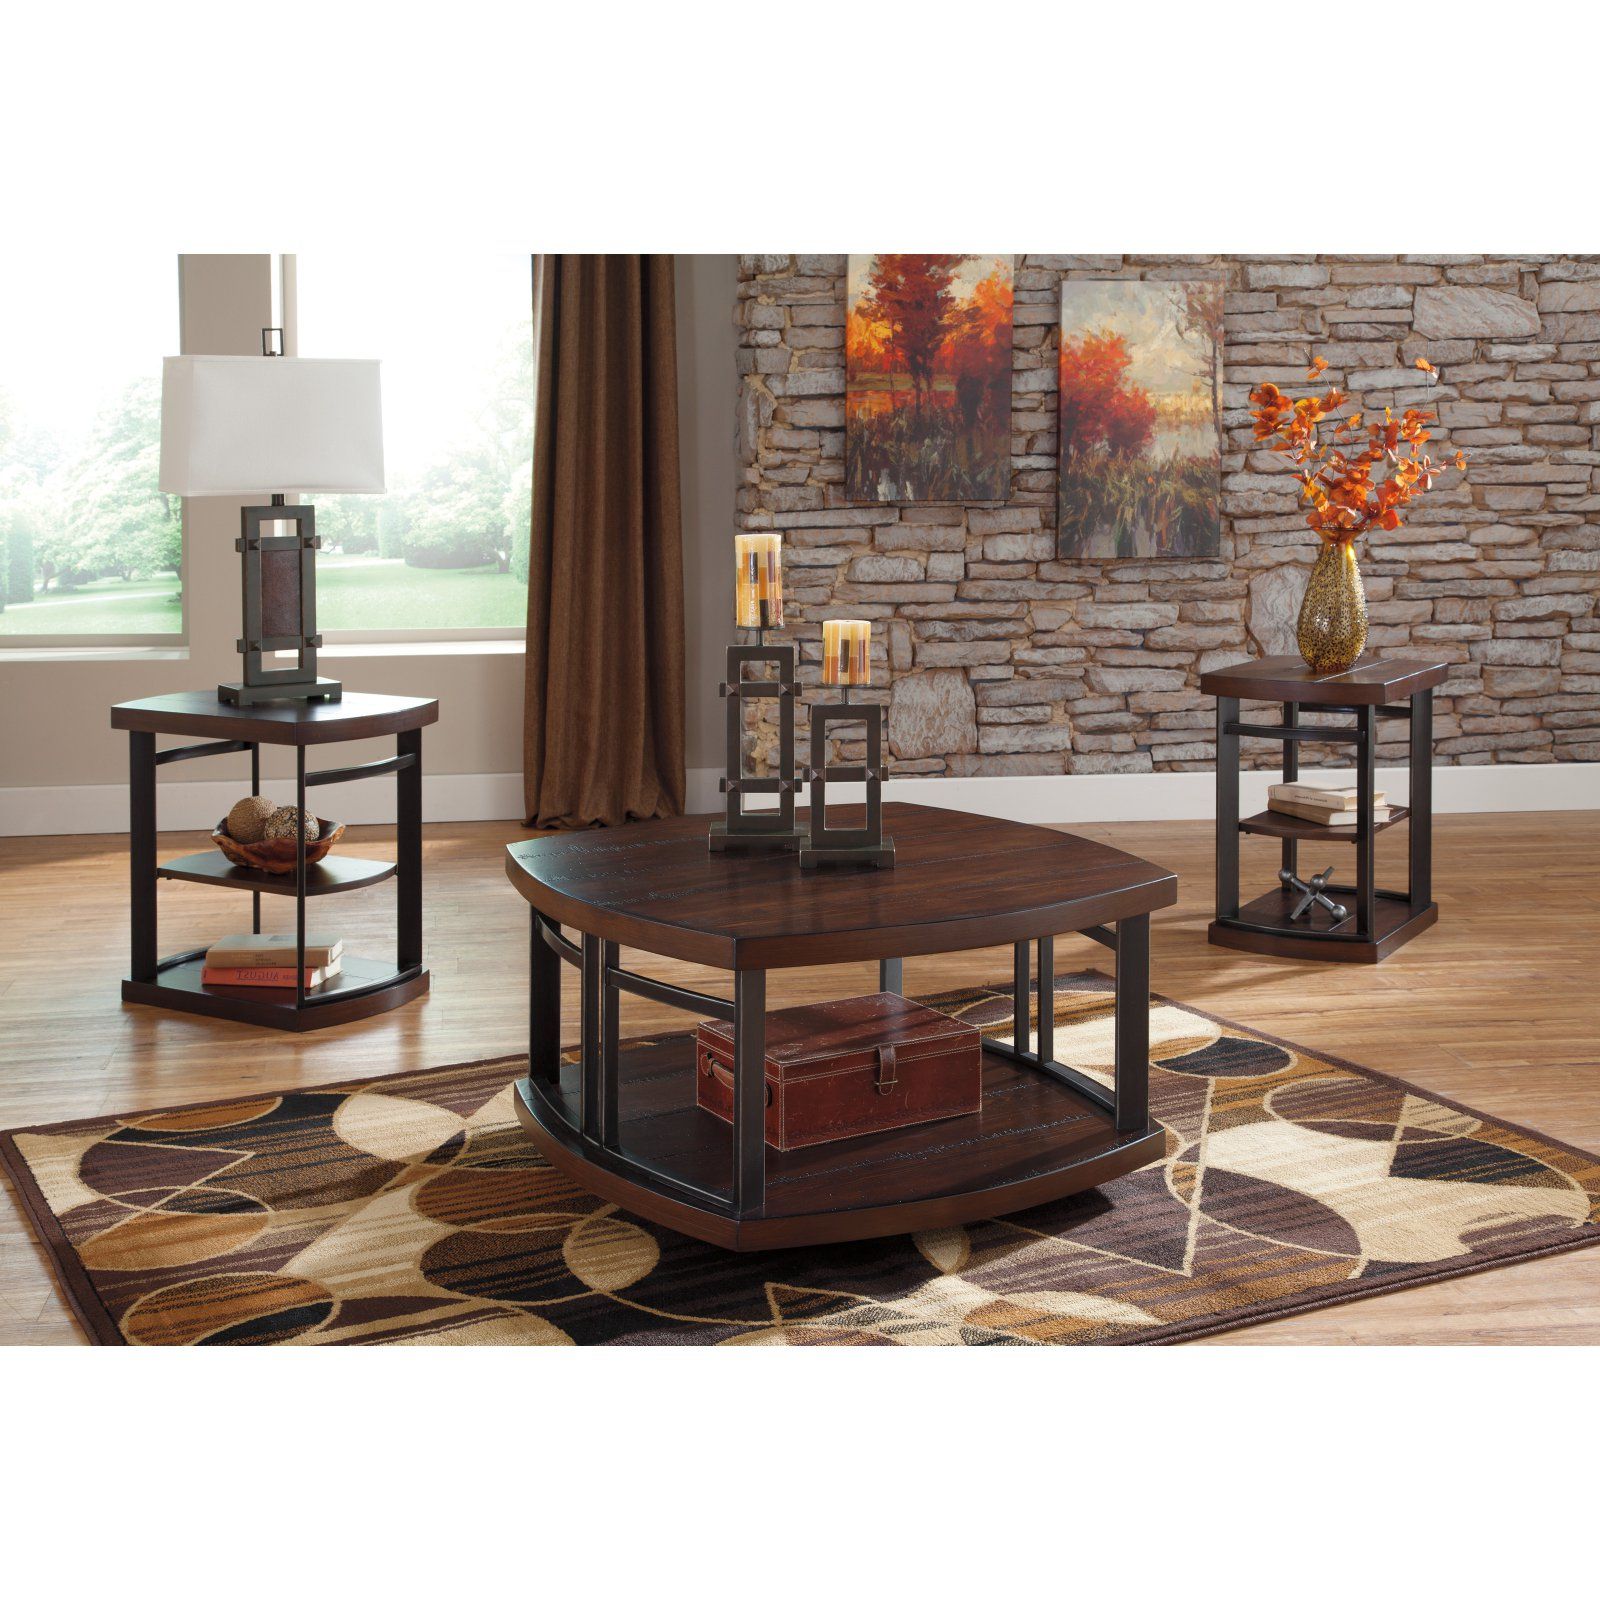 3 Piece Shelf Coffee Tables Pertaining To Current Signature Designashley Challiman 3 Piece Coffee Table Set – Walmart (View 7 of 10)